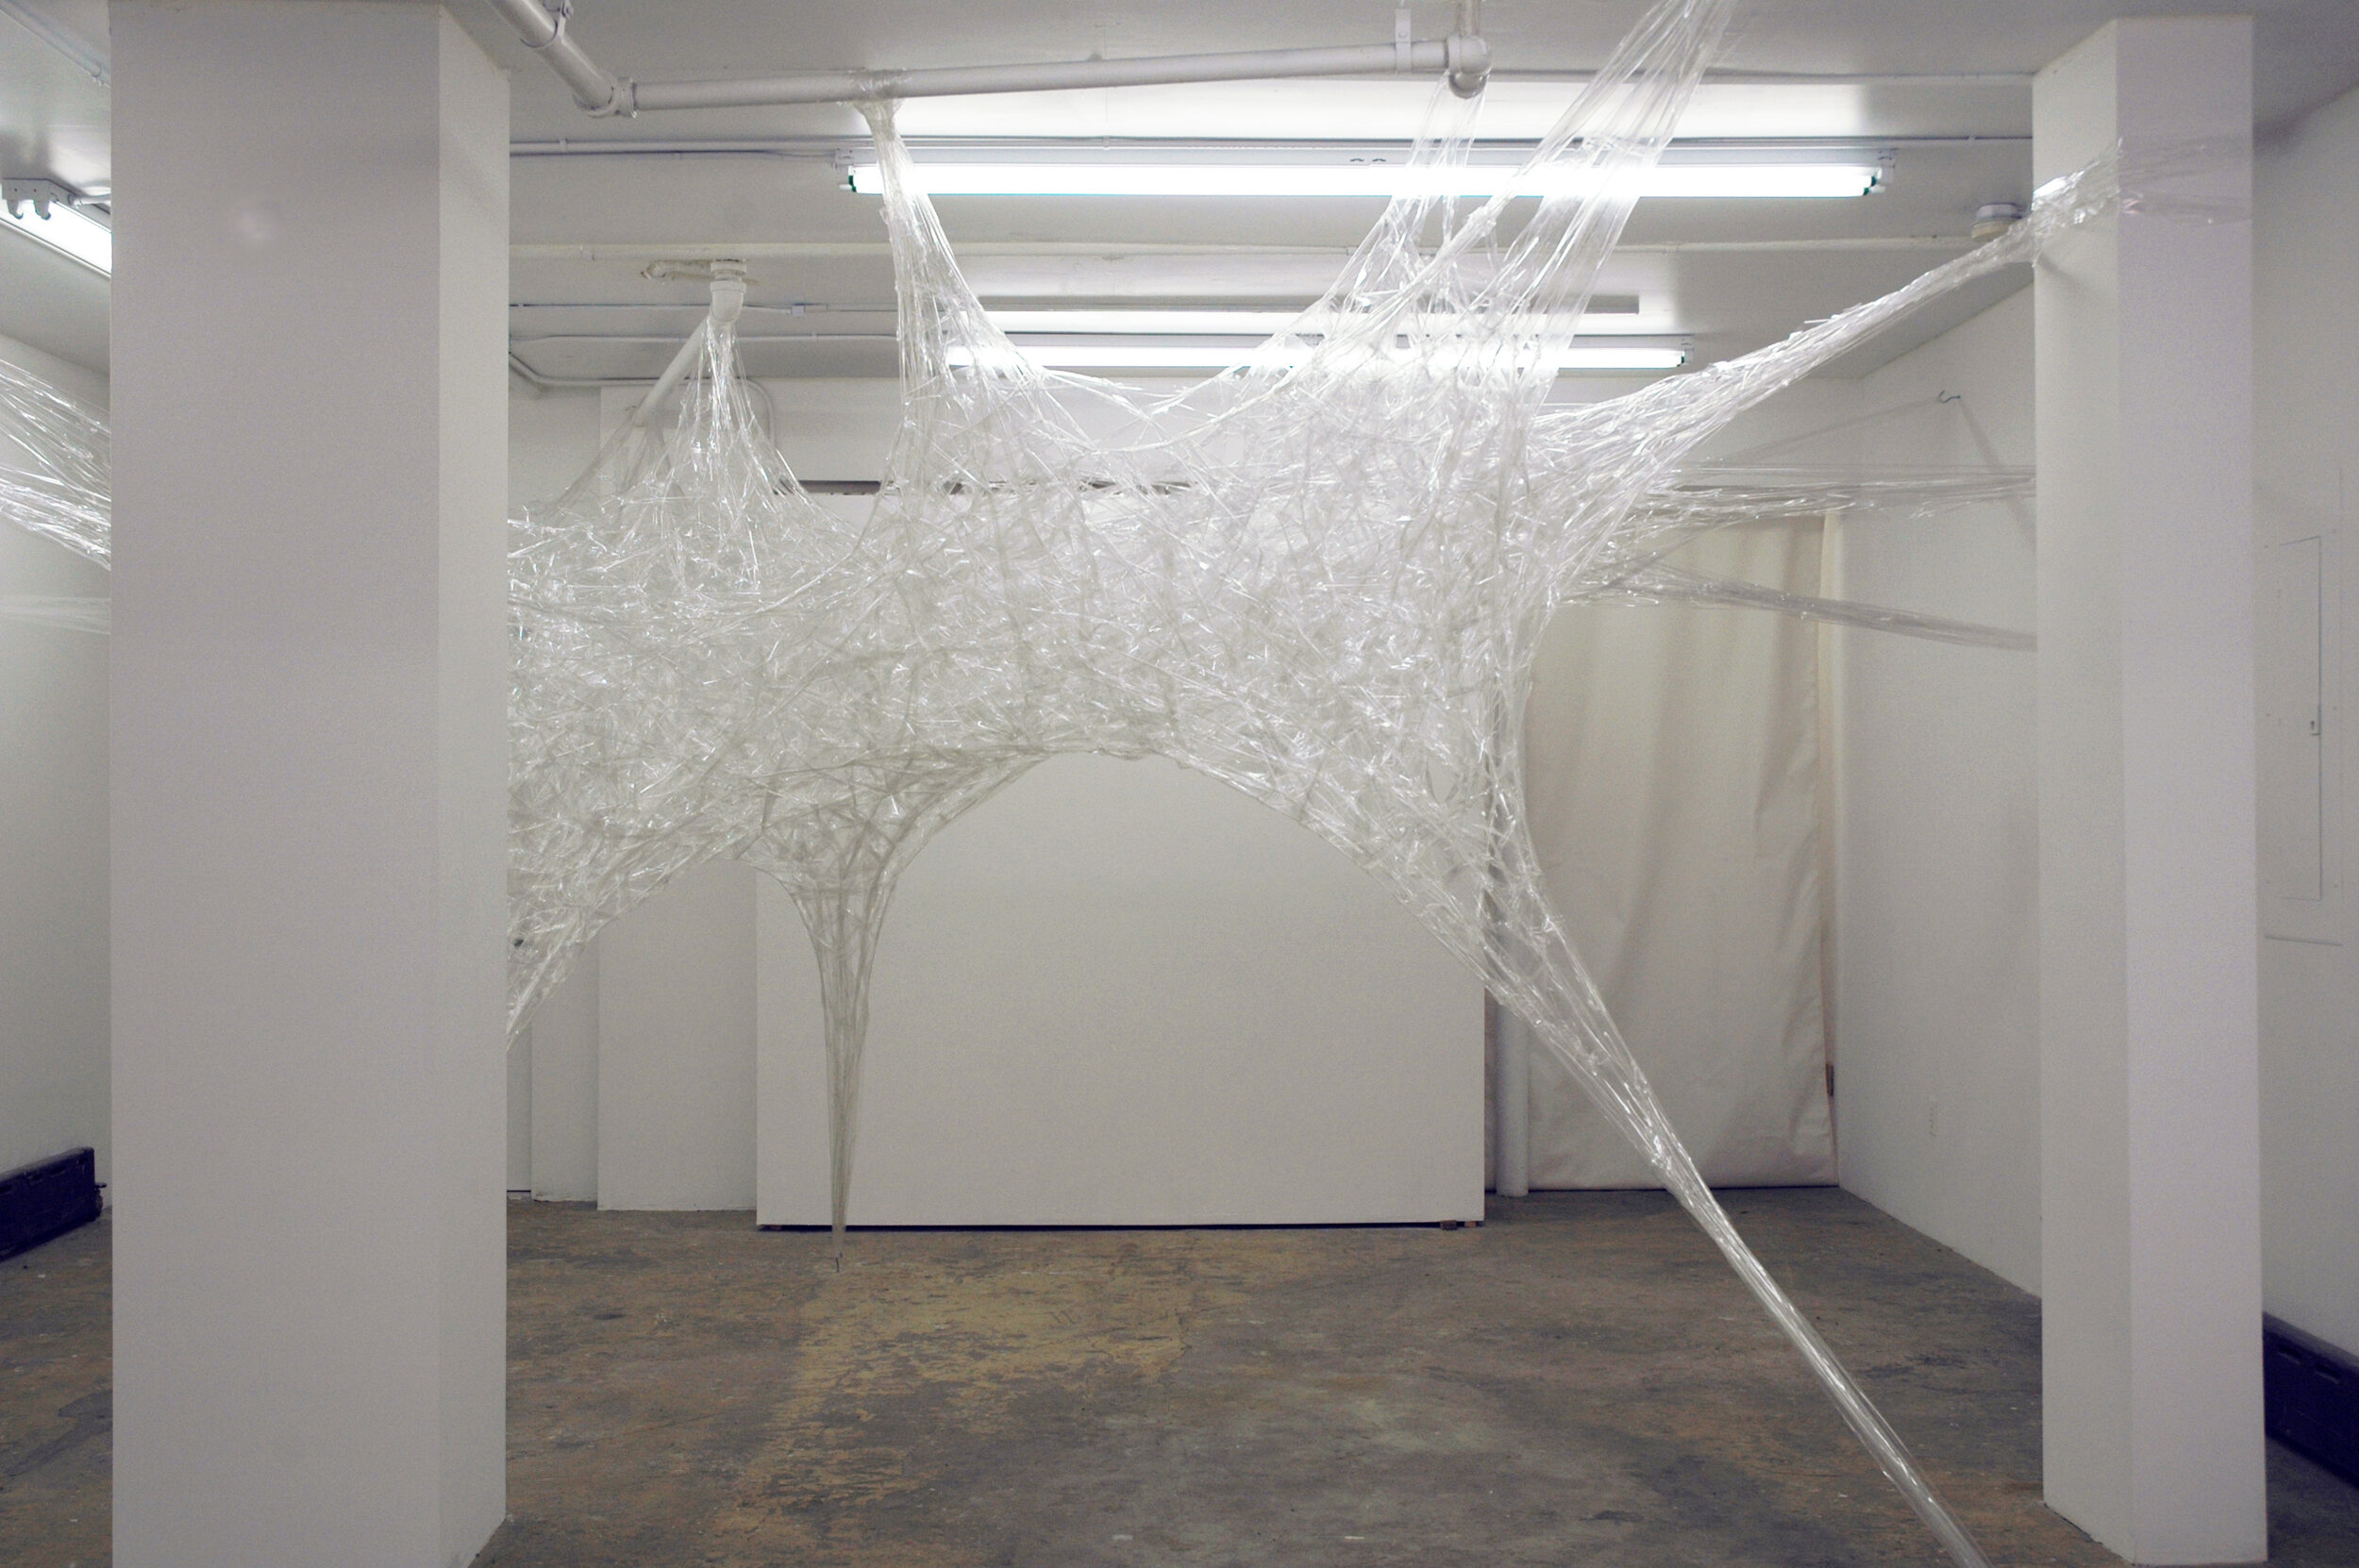 Installation image from the 2012 Gereon Krebber exhibition, Contrary Data, at Cindy Rucker Gallery